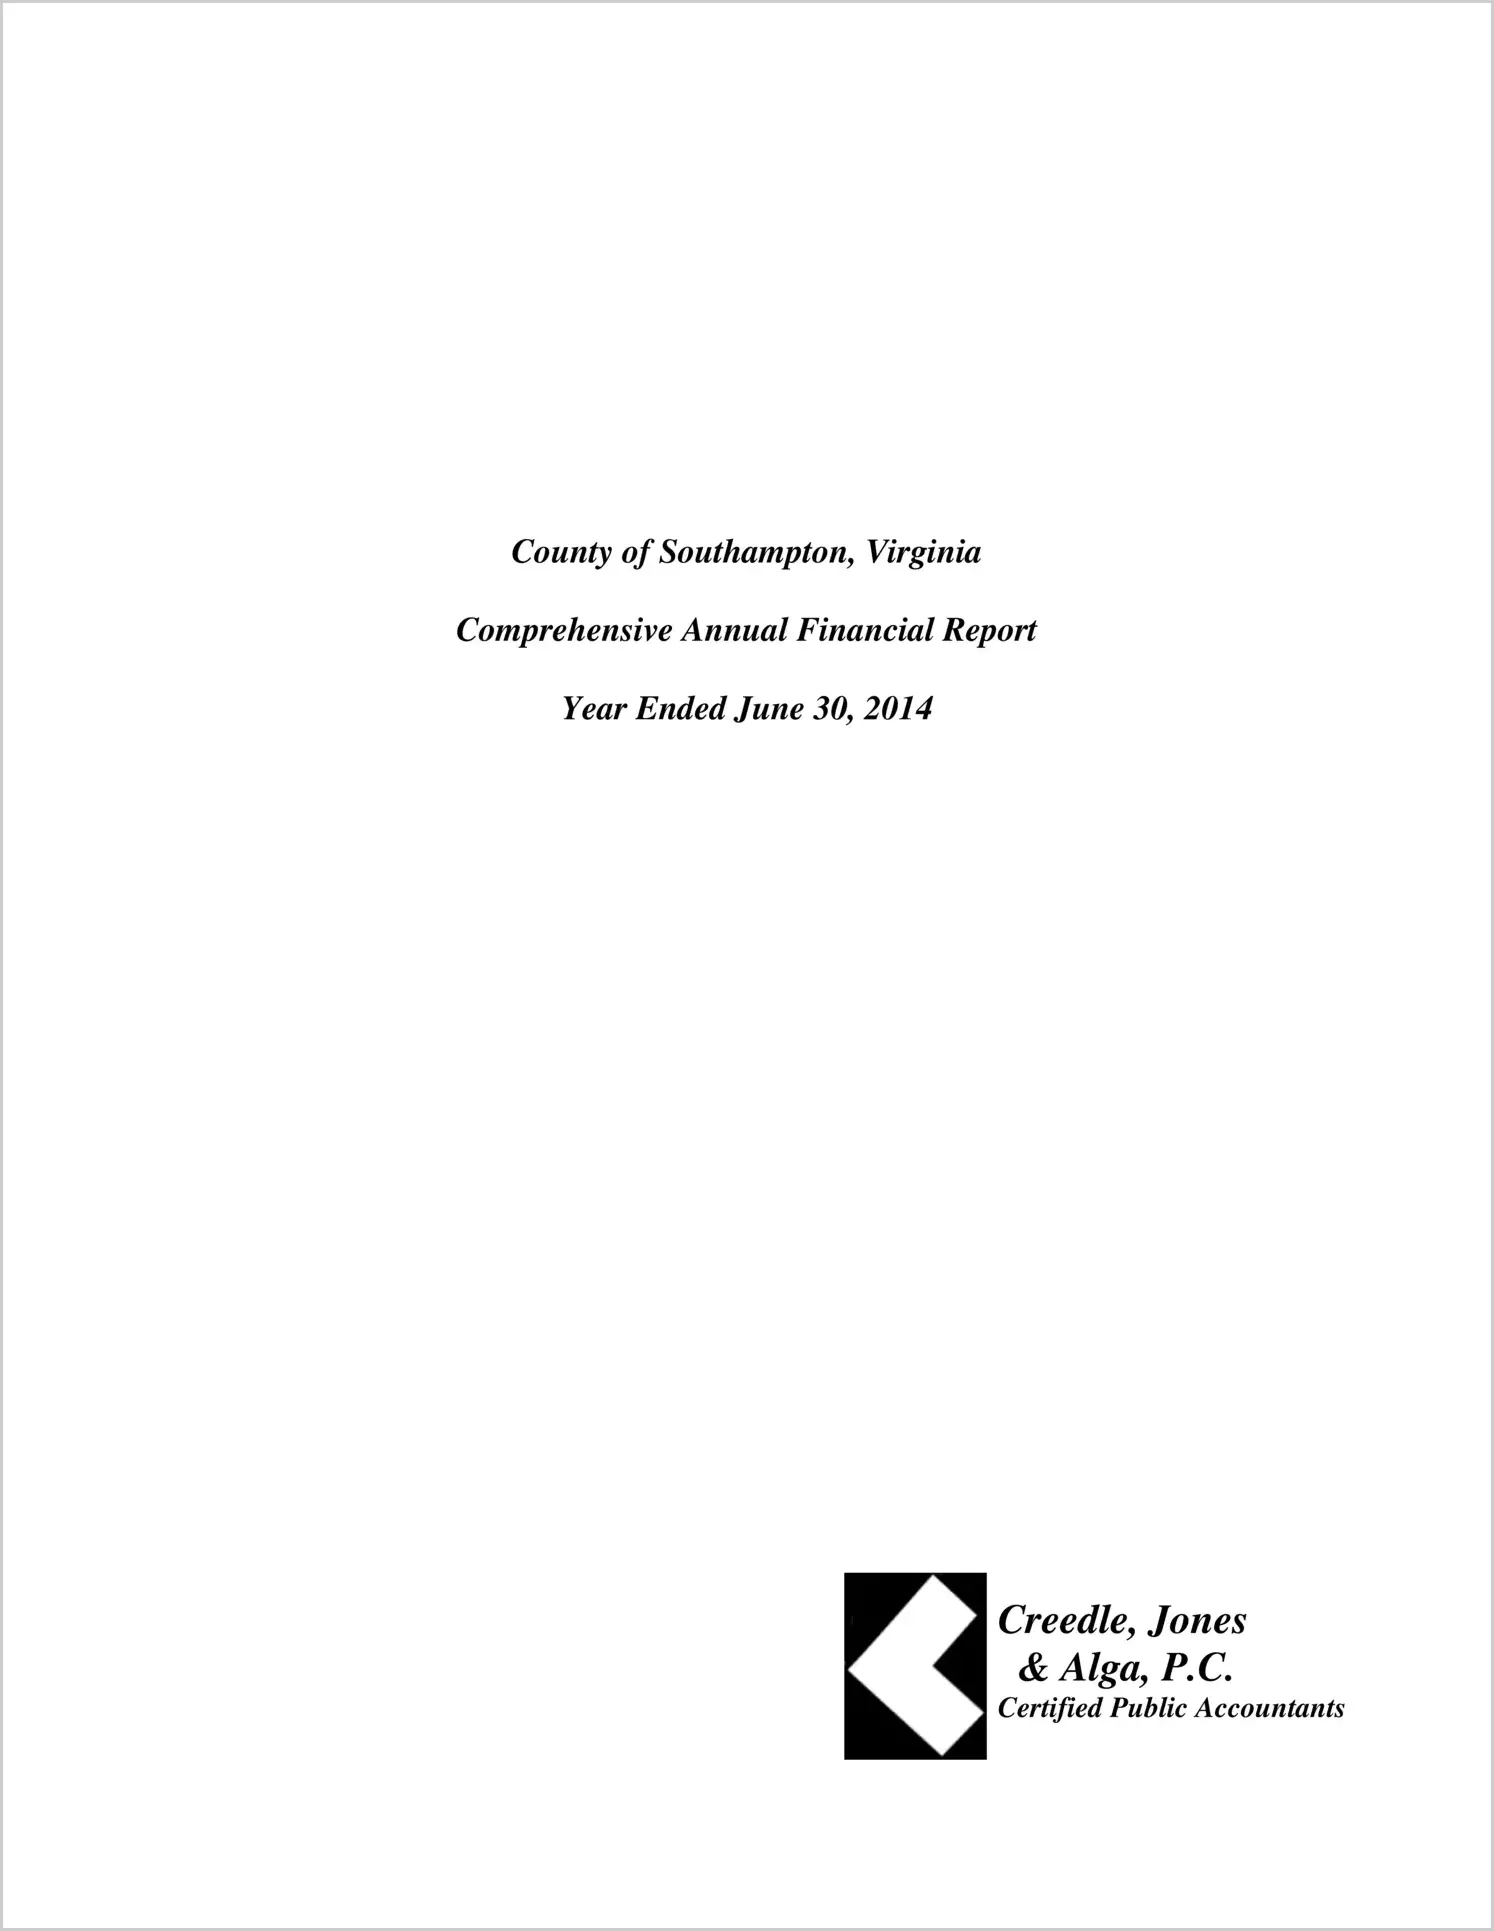 2014 Annual Financial Report for County of Southampton